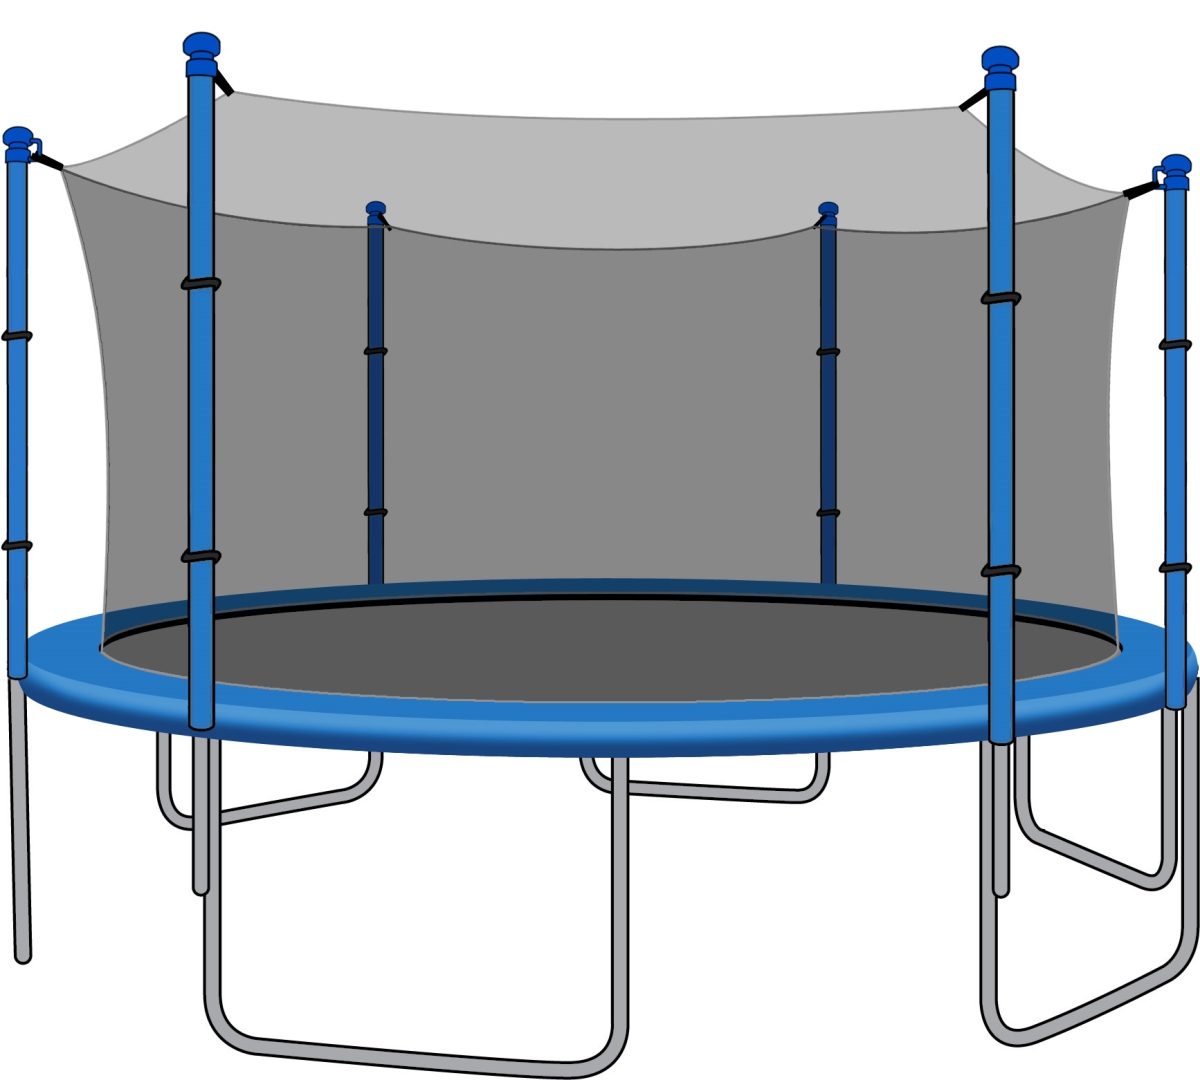 Netjz-1406st0000 14ft. Trampoline Net For Trampolines Using 6 Straight Poles Or 3 Arches